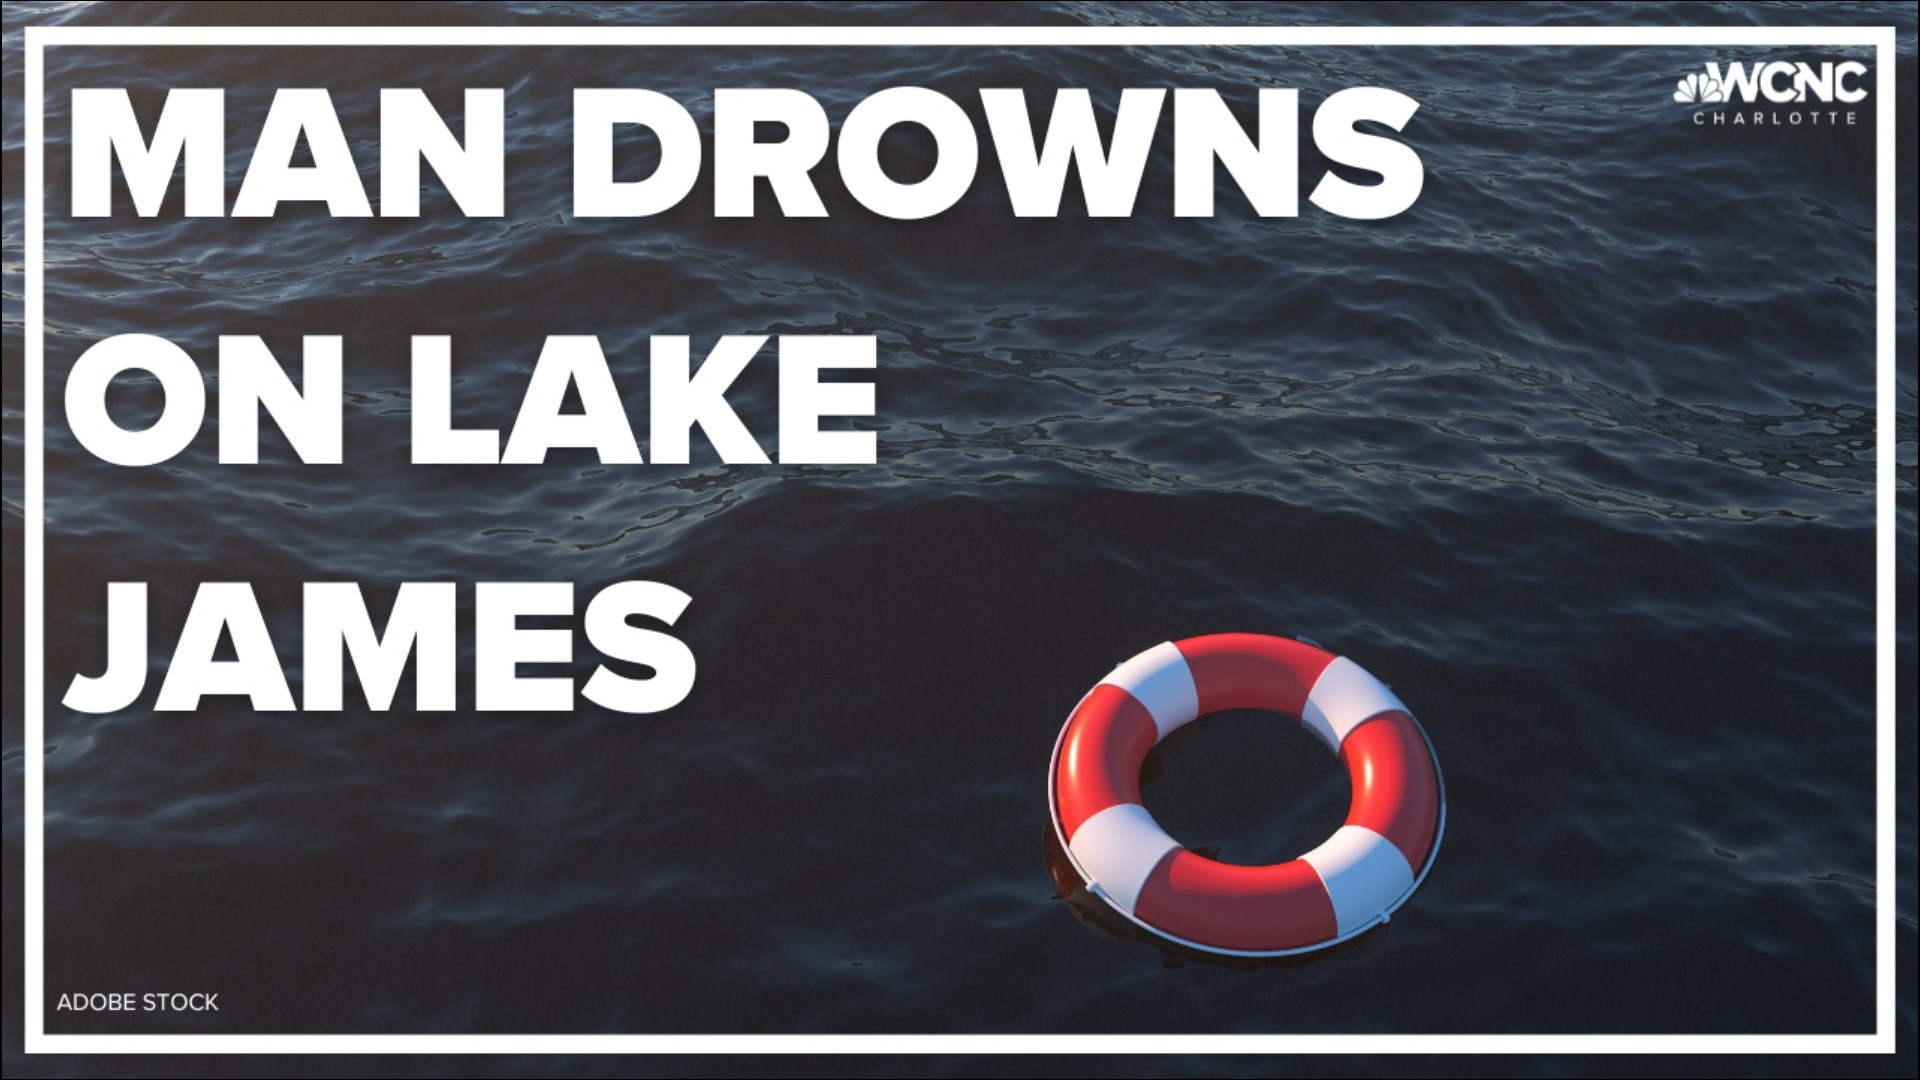 A 78 year old drowned in Morganton this weekend. It happened on Lake James near the Linville boat access.